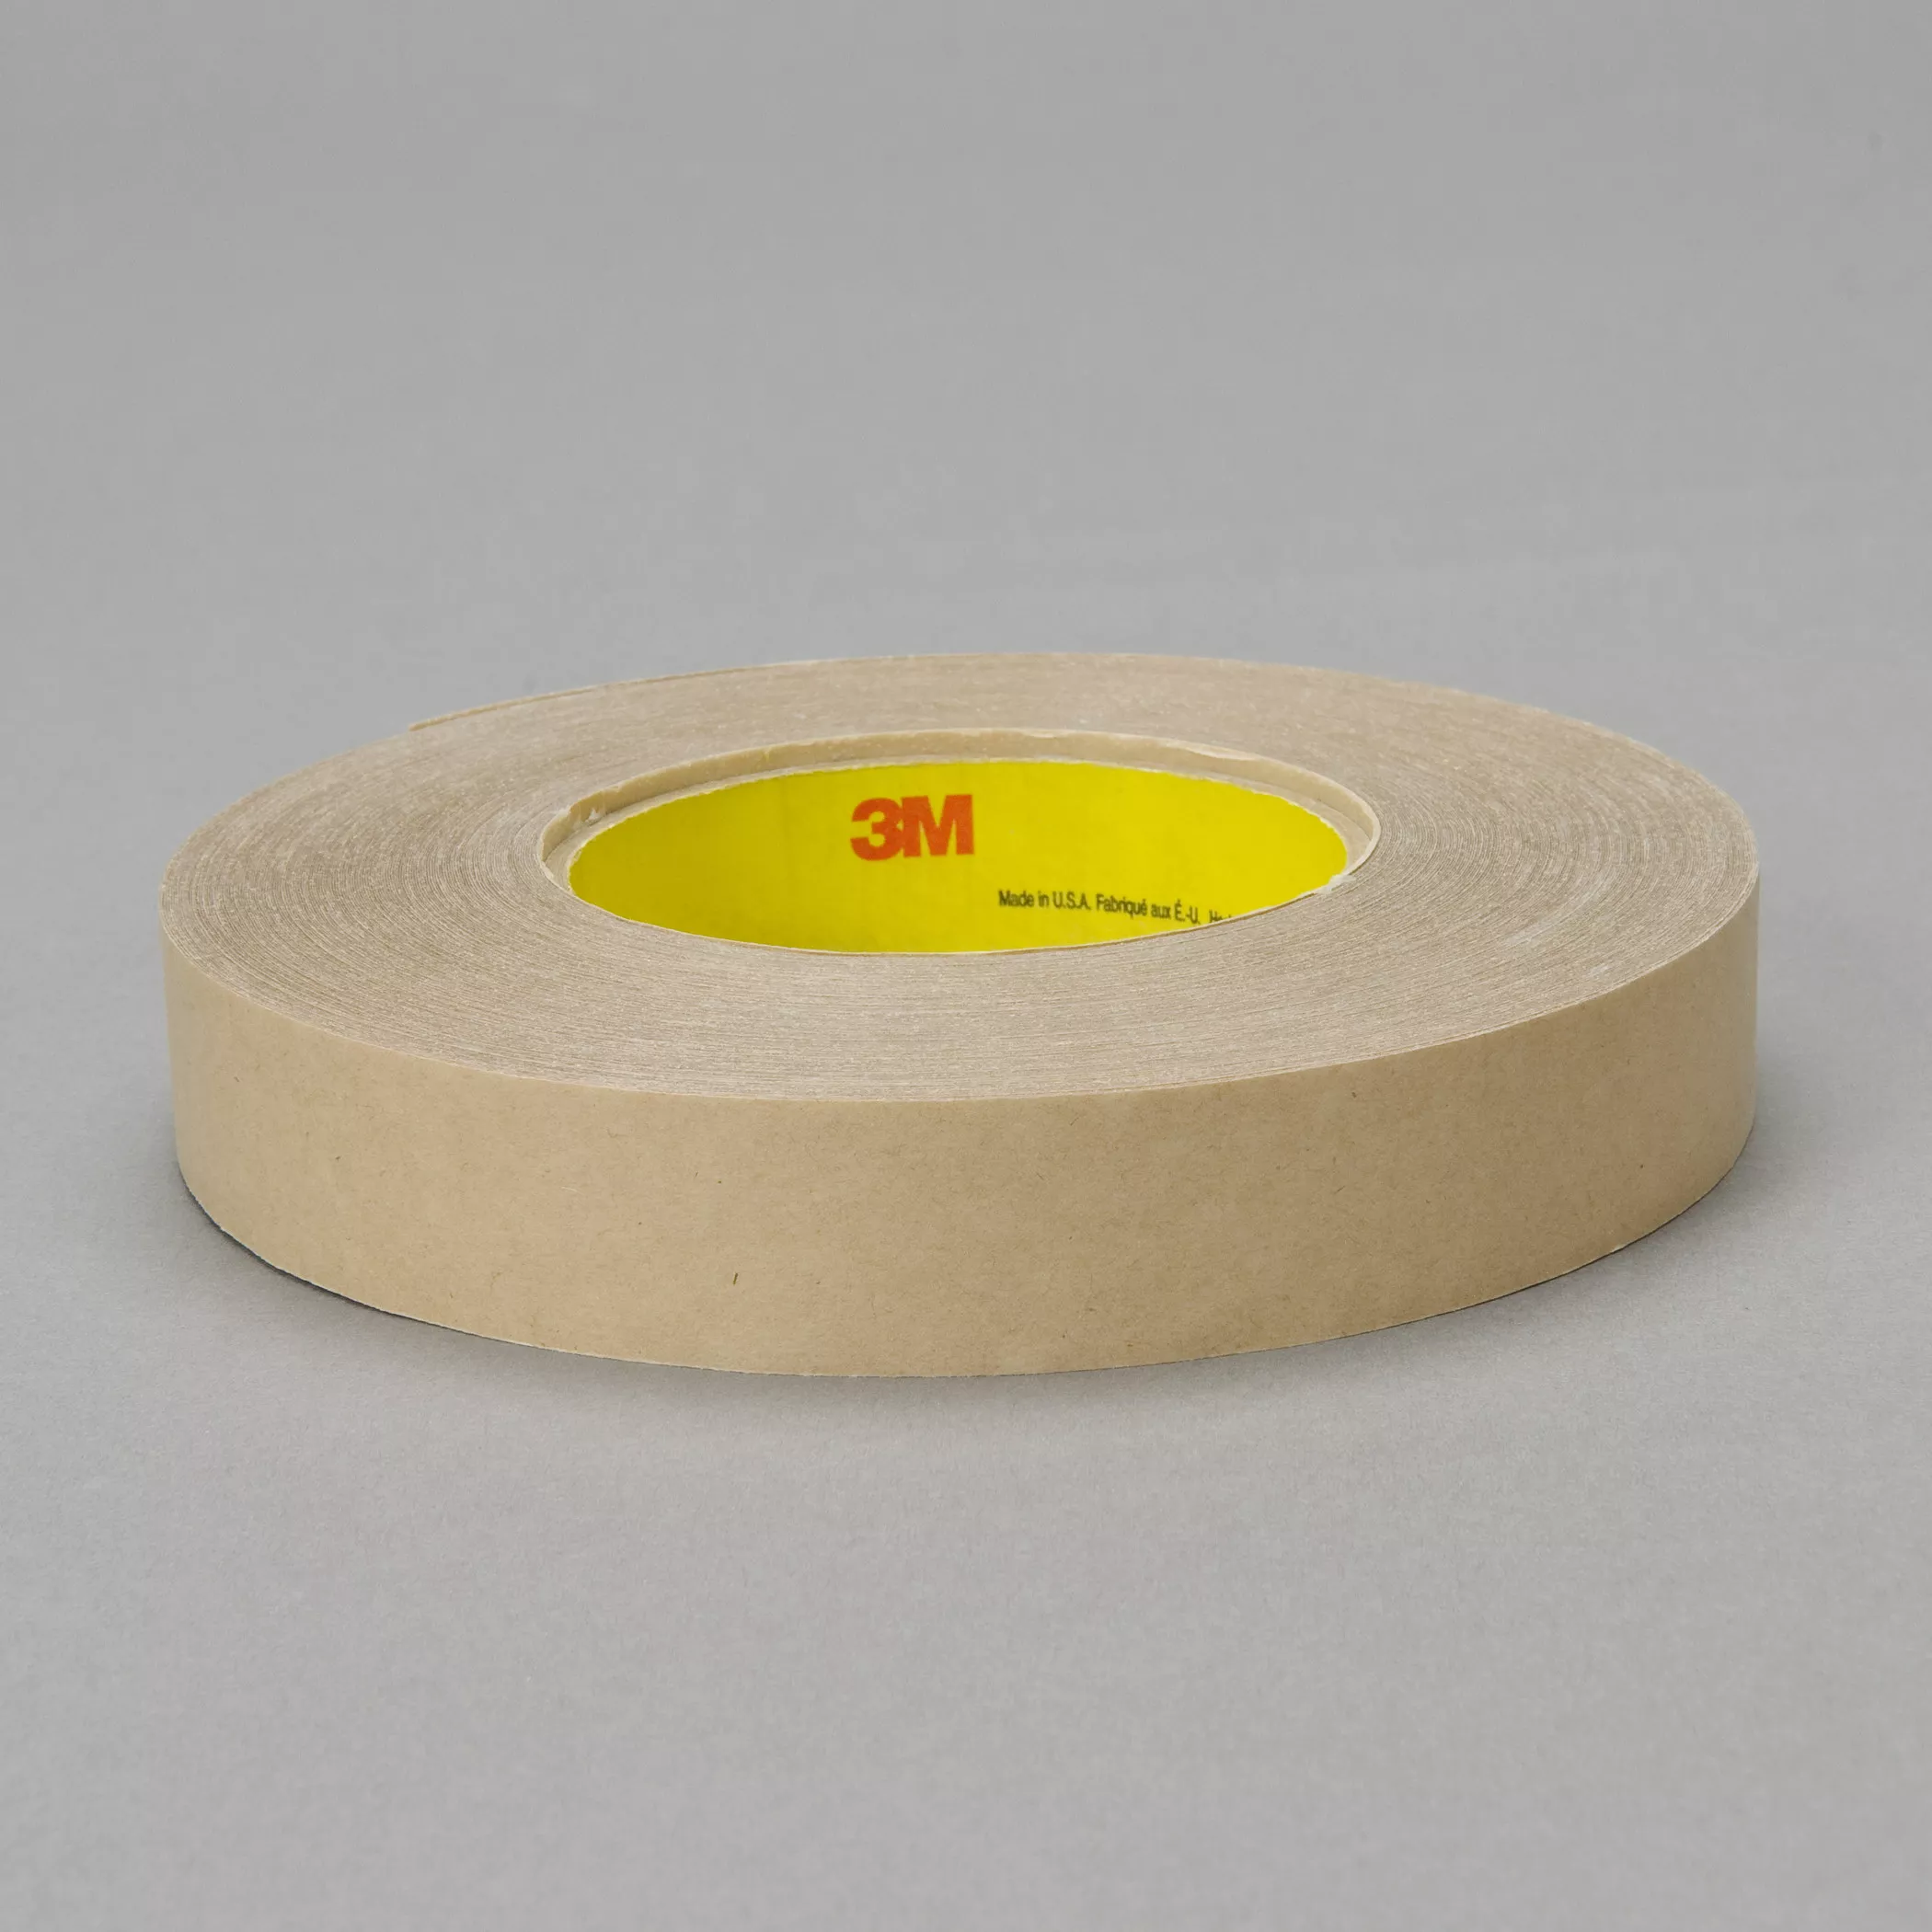 3M™ Adhesive Transfer Tape 9485PC, Clear, 1 1/2 in x 60 yd, 5 mil, 24
Roll/Case